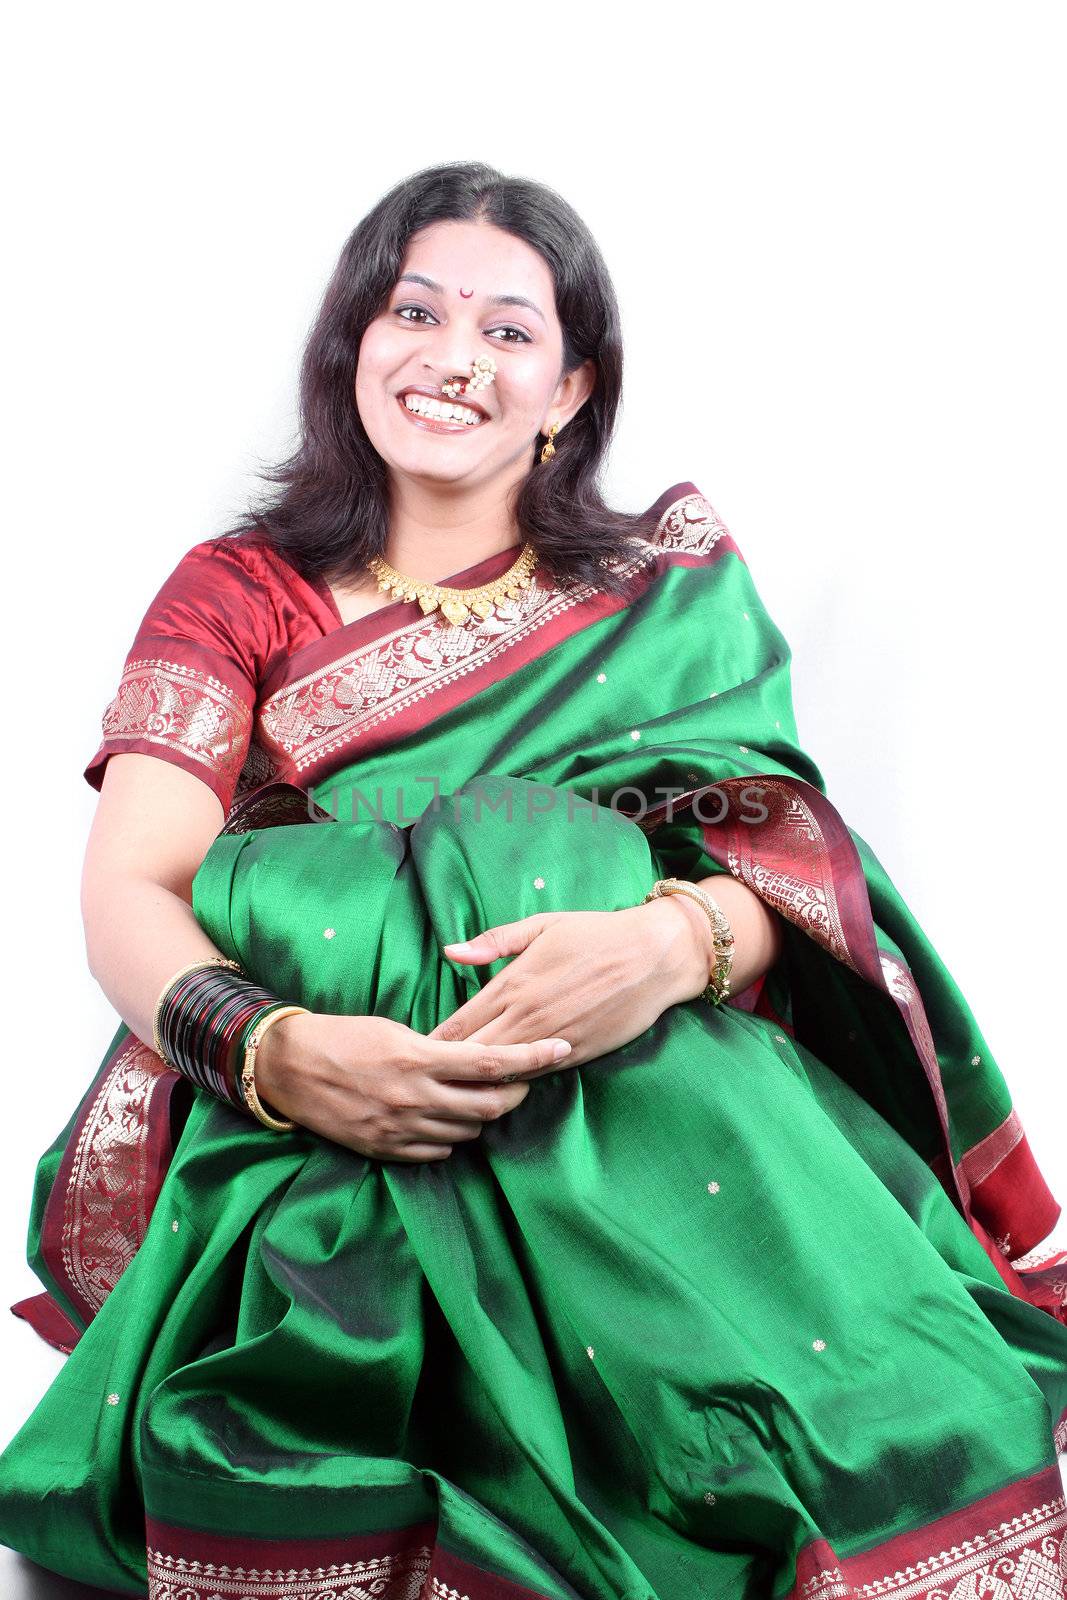 A happy Indian woman wearing a green sari, sitting on a white background.